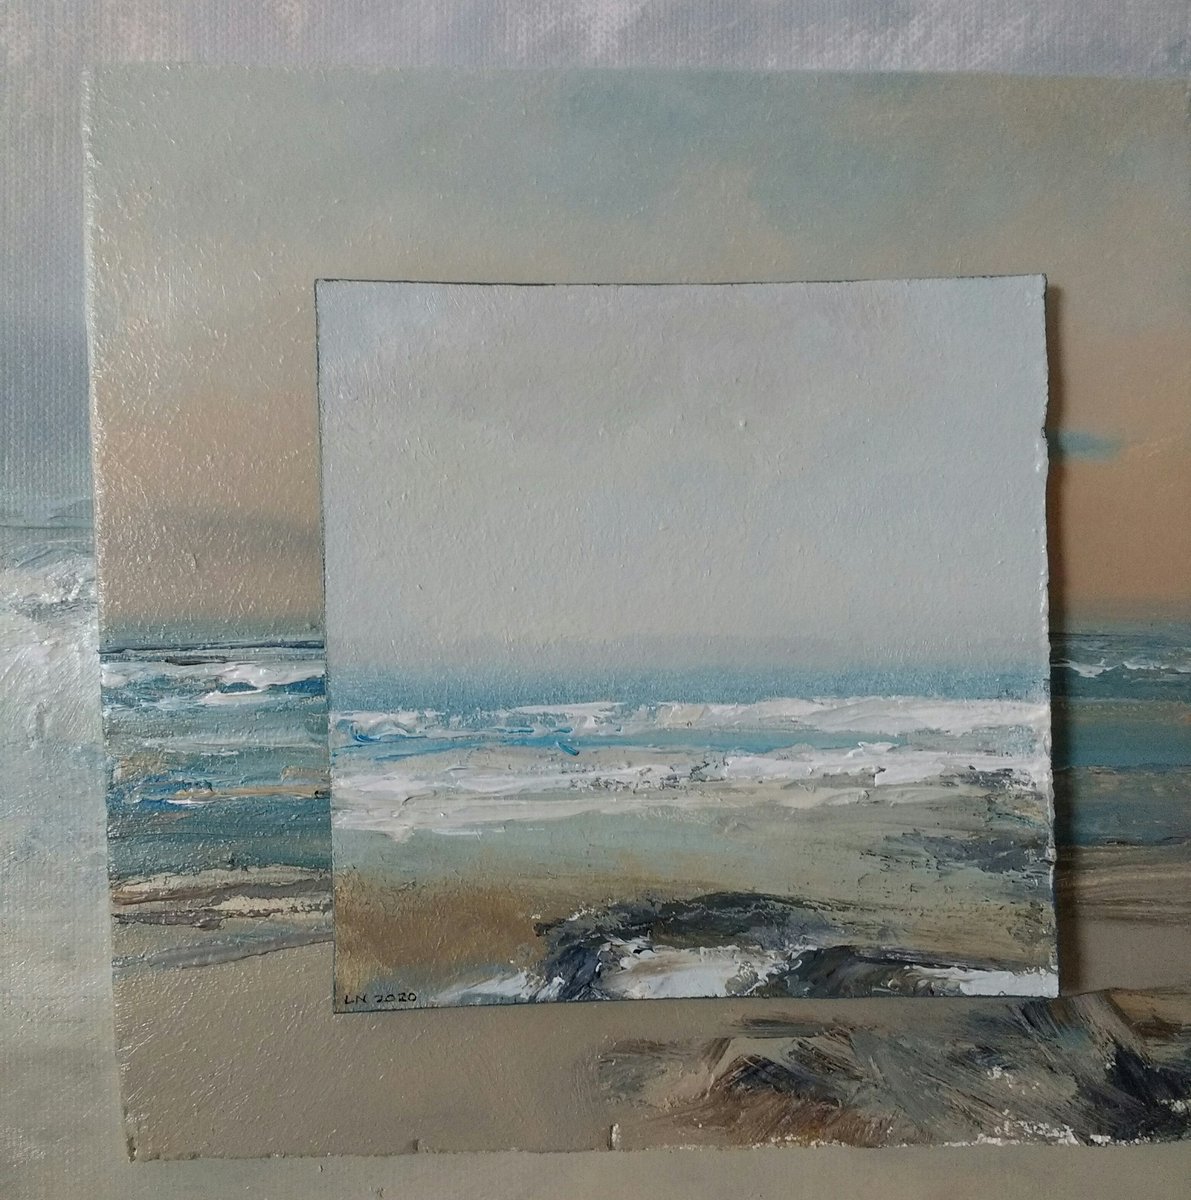 Paintings at various stages of development. The top one's finished and on display @ArtSpaceStIves 

#originalpainting #oil #CornishArtist #seascape #Beach #Surf #StIves #Cornwall